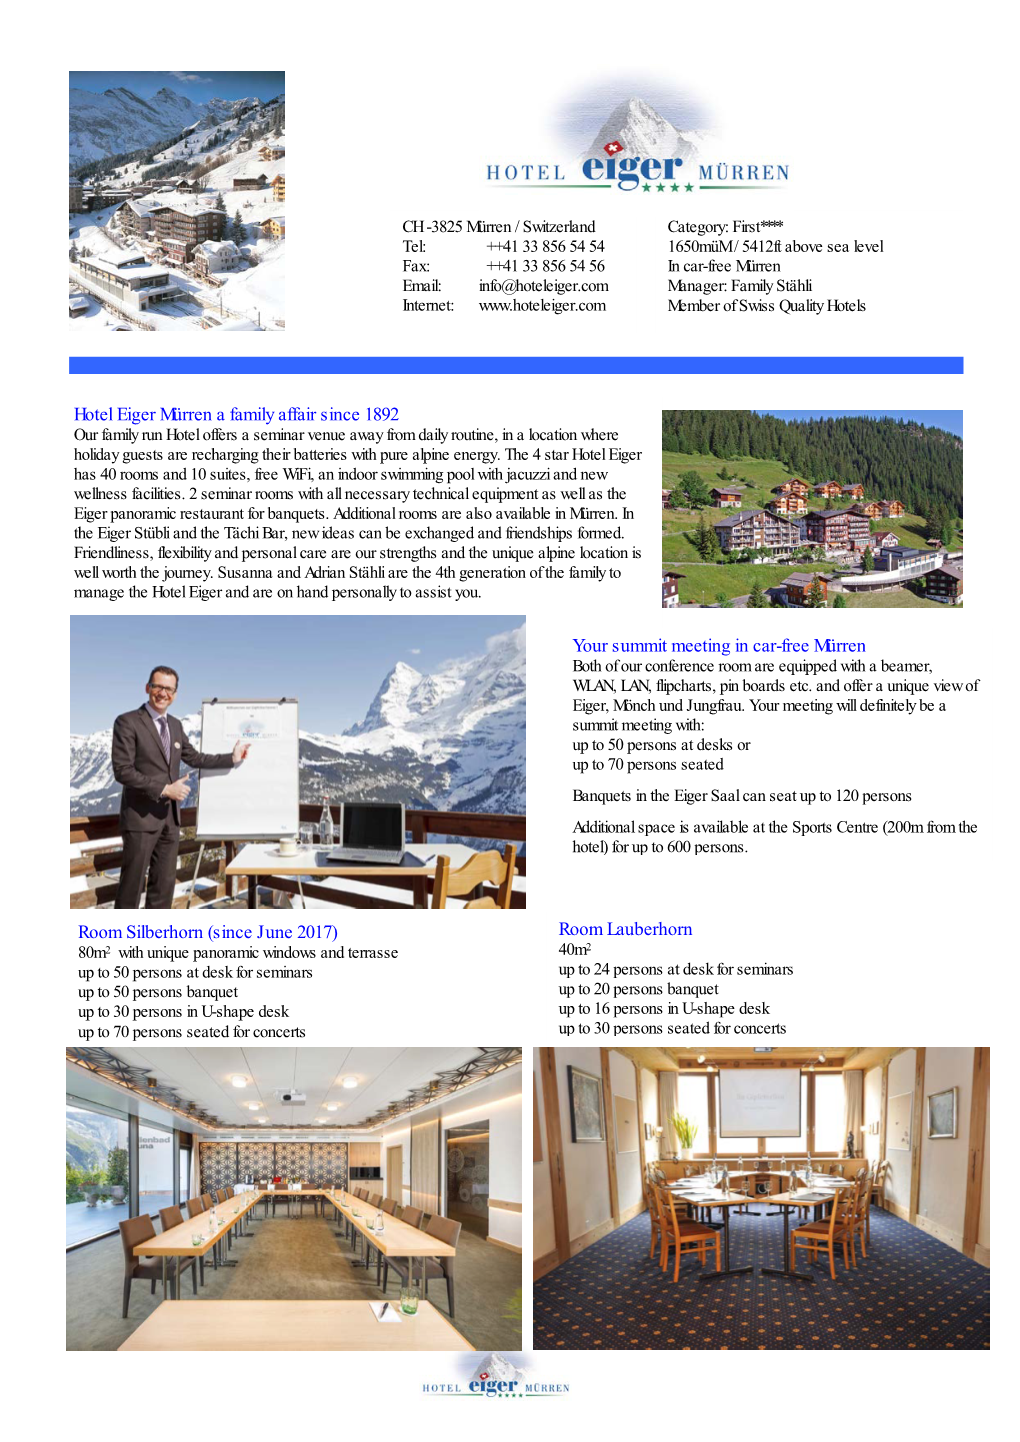 Meetings and Events in the Hotel Eiger